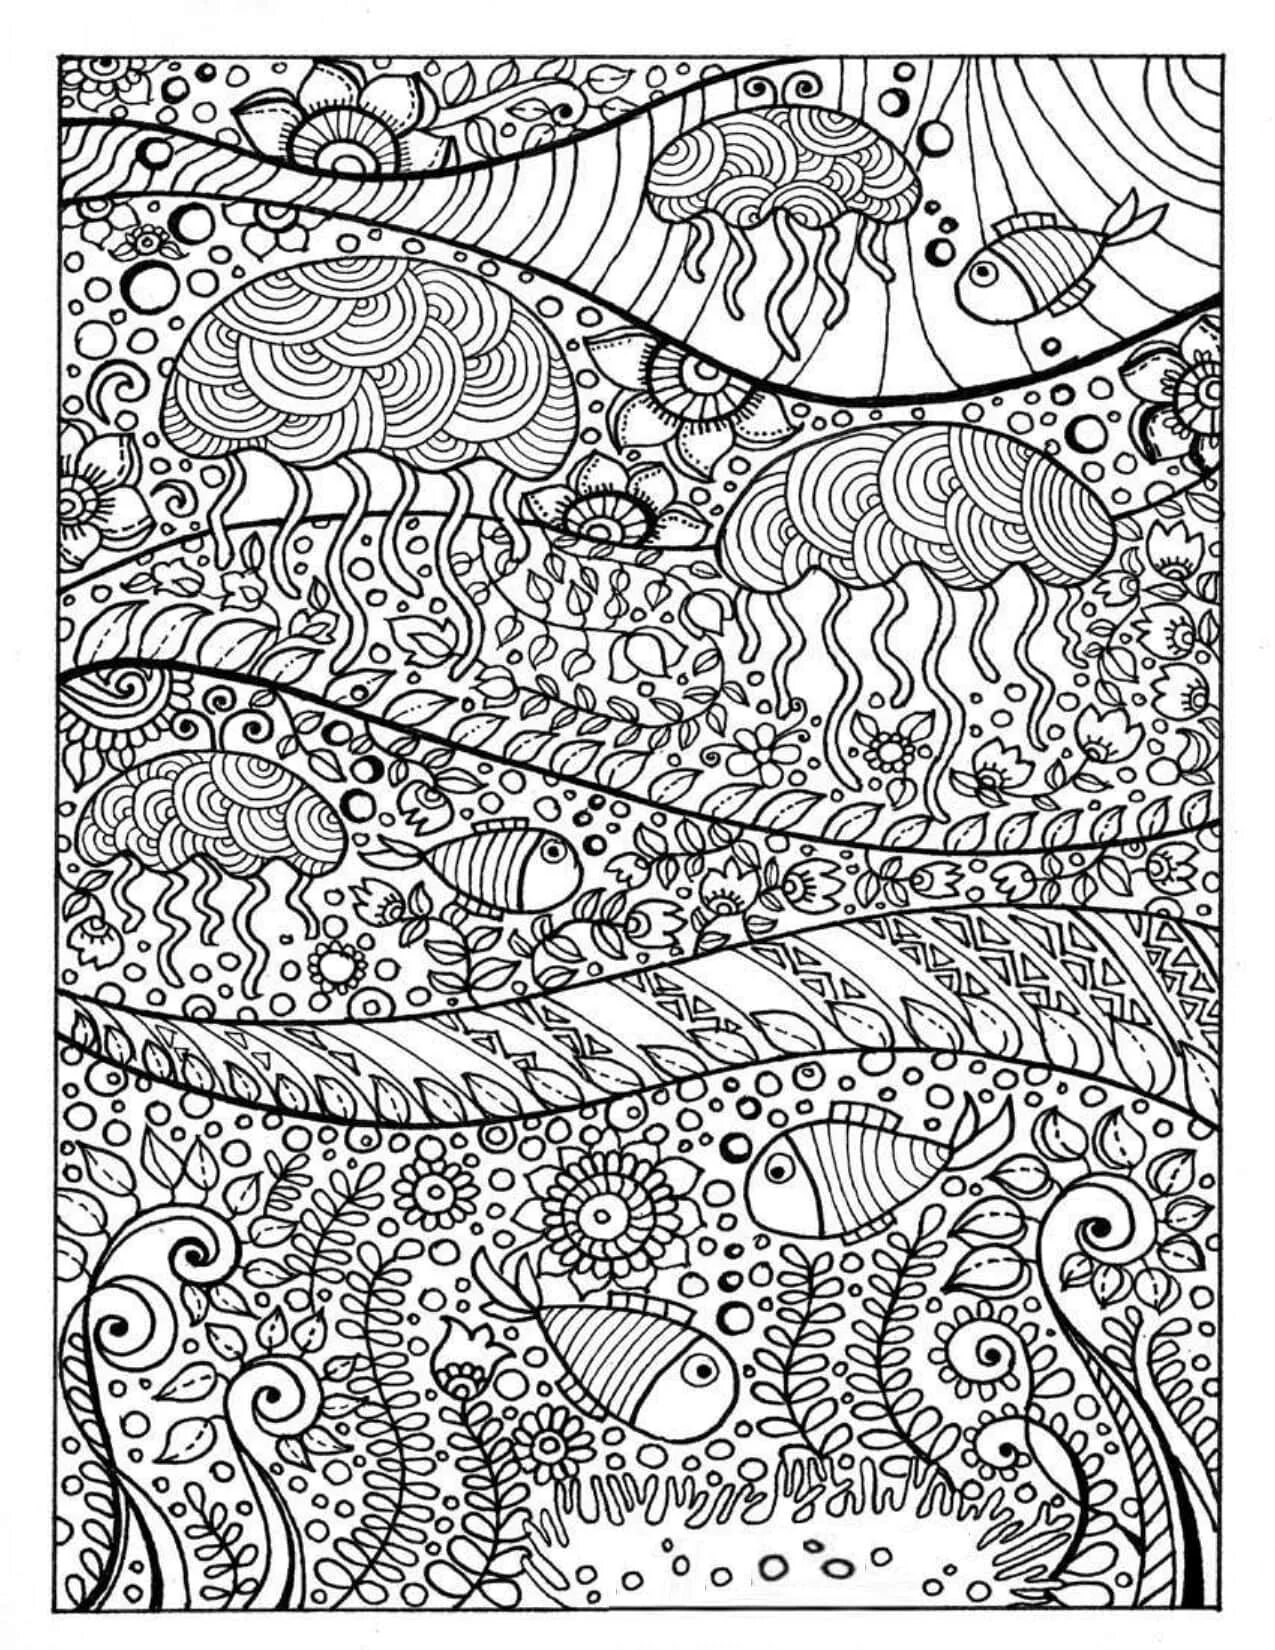 Nervous coloring book